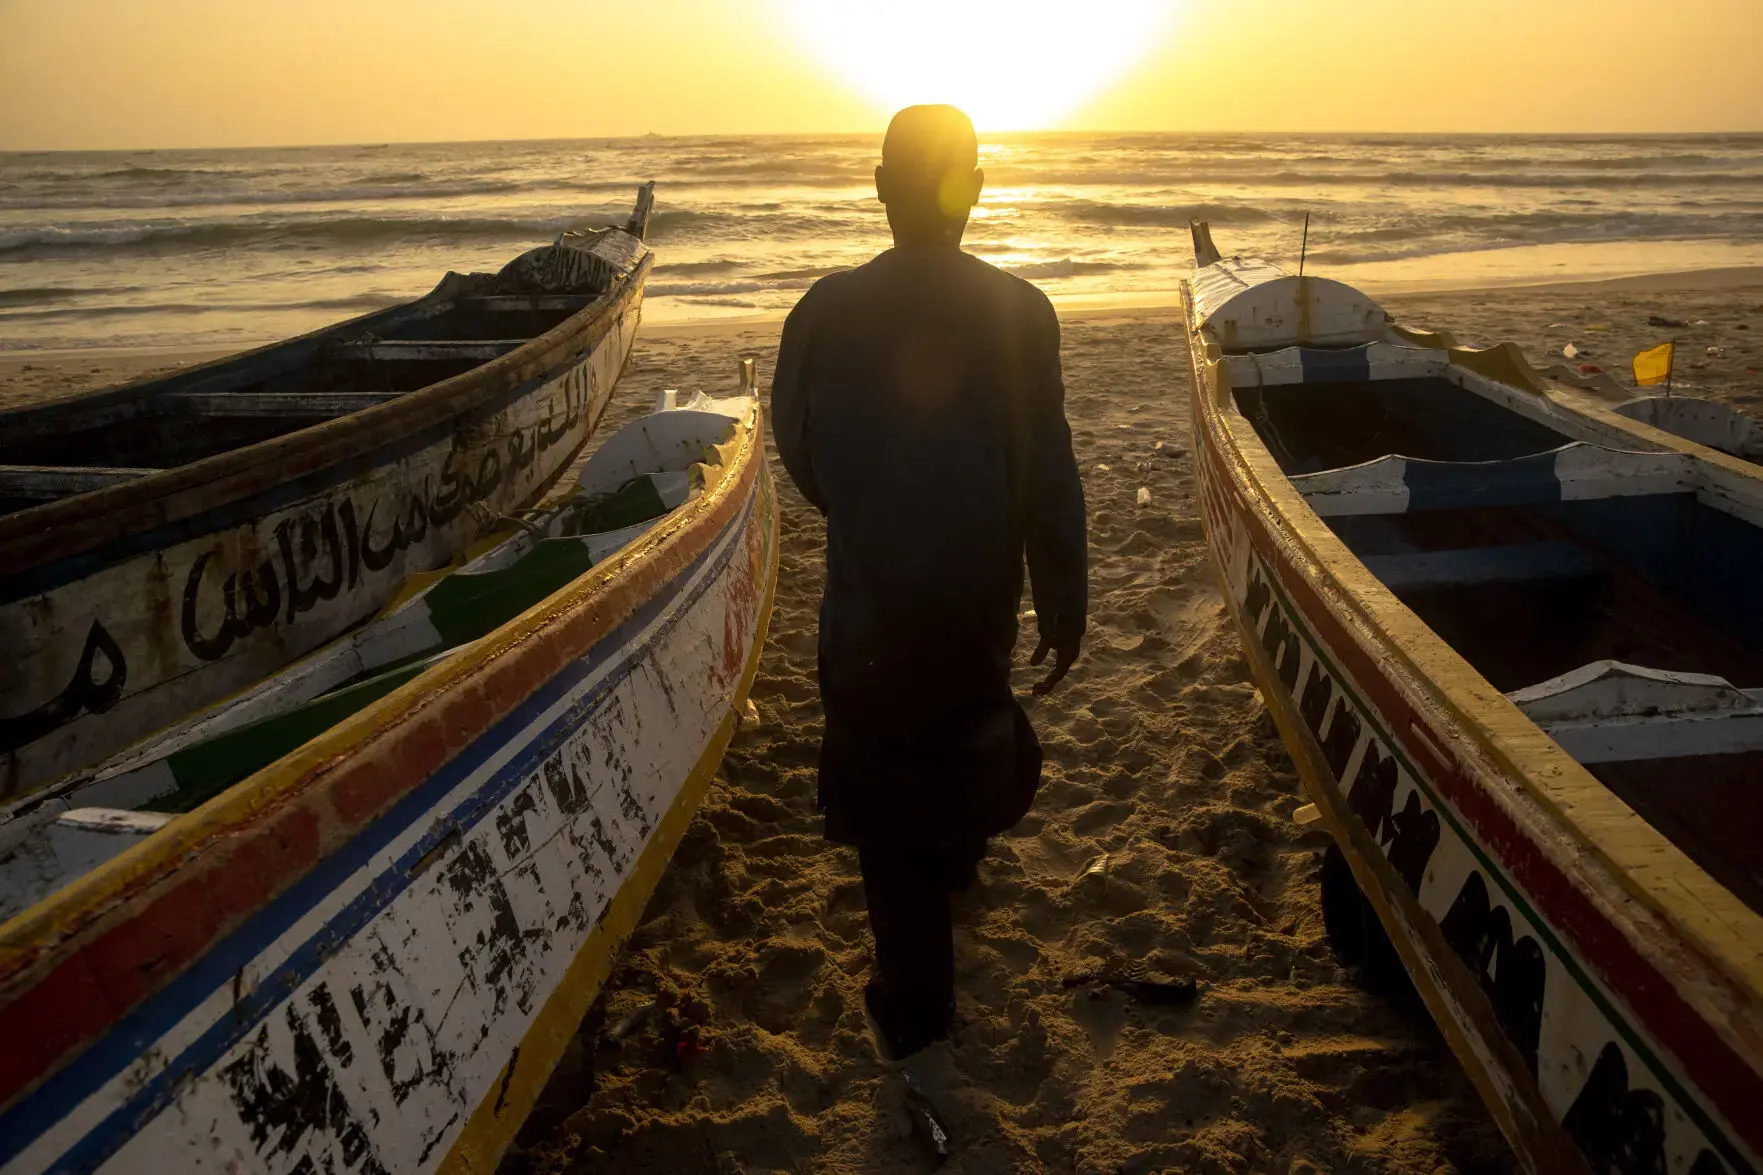 The back of a man's silhouette is visible at sunset, looking out at the ocean in between three wooden and colorful fishing boats.